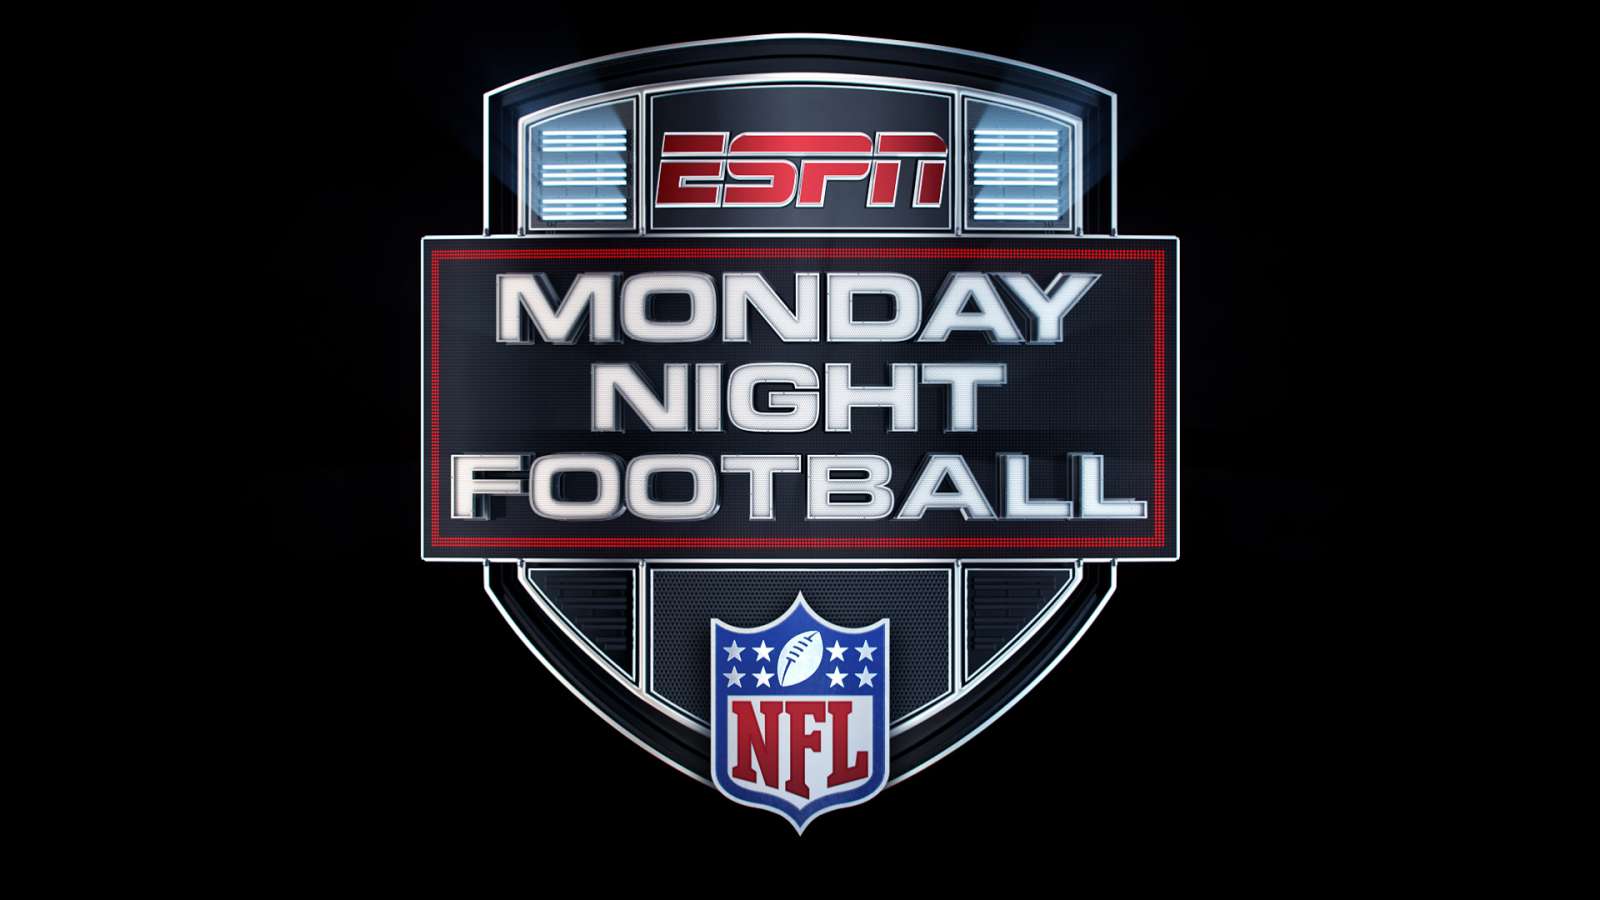 How To Watch Monday Night Football On Espn App Discount, Save 47